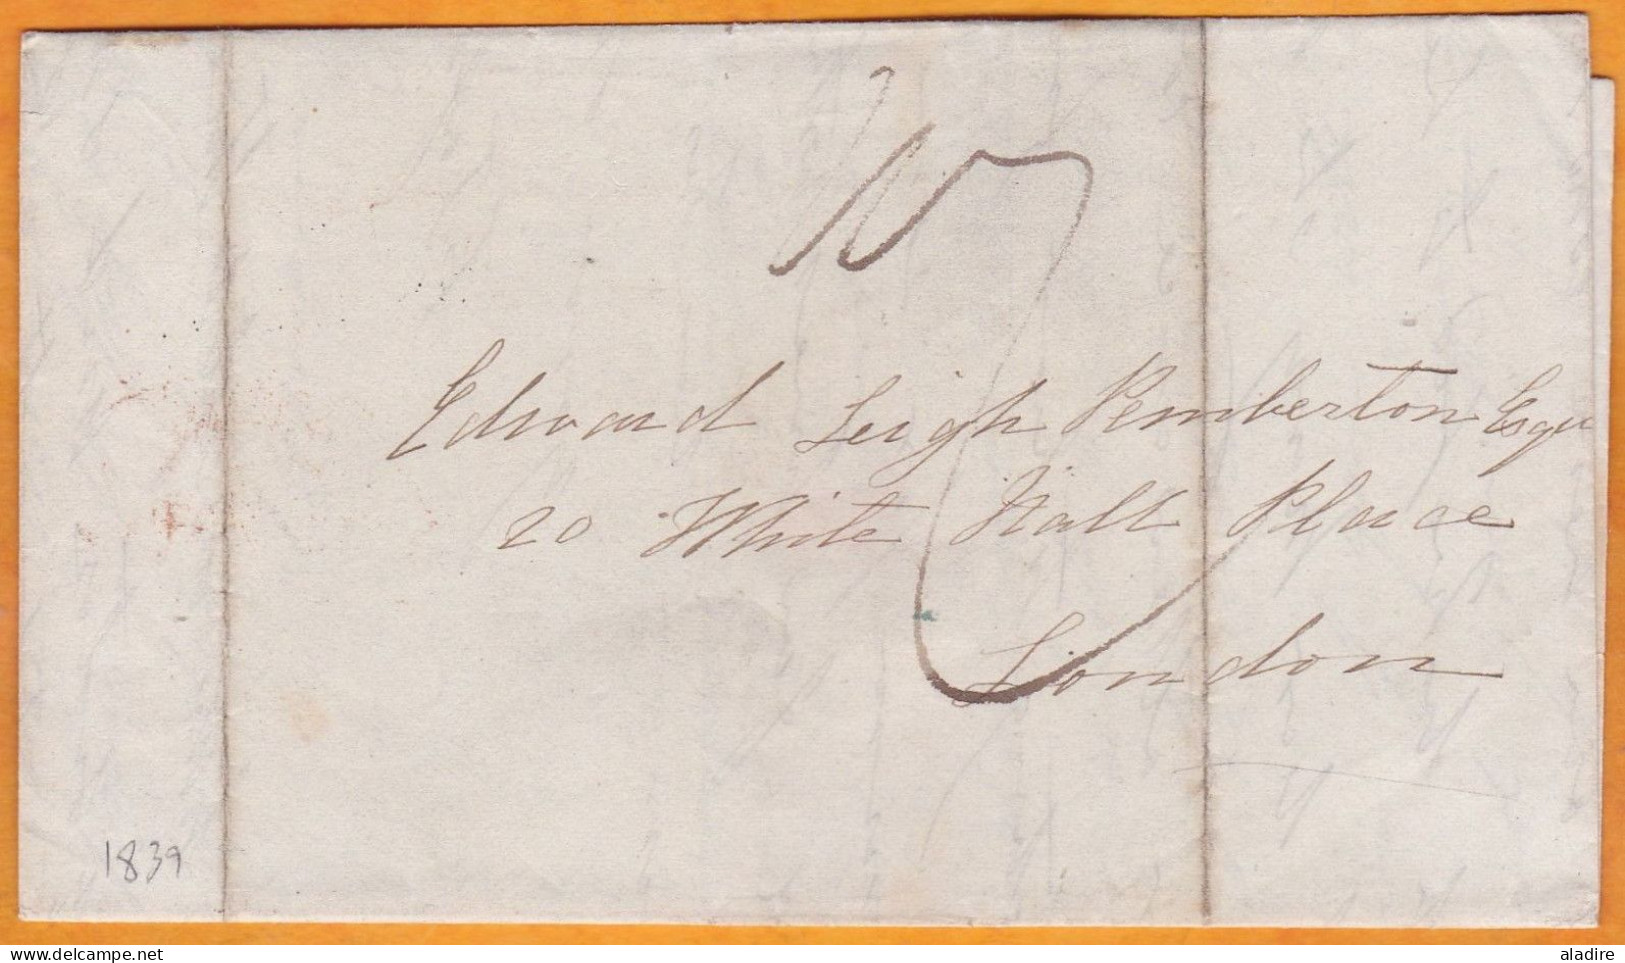 1839 - QV - LIVERPOOL Folded SHIP LETTER To London - Arrival Stamp - Lettre Maritime Liverpool Vers London, Angleterre - Marcophilie